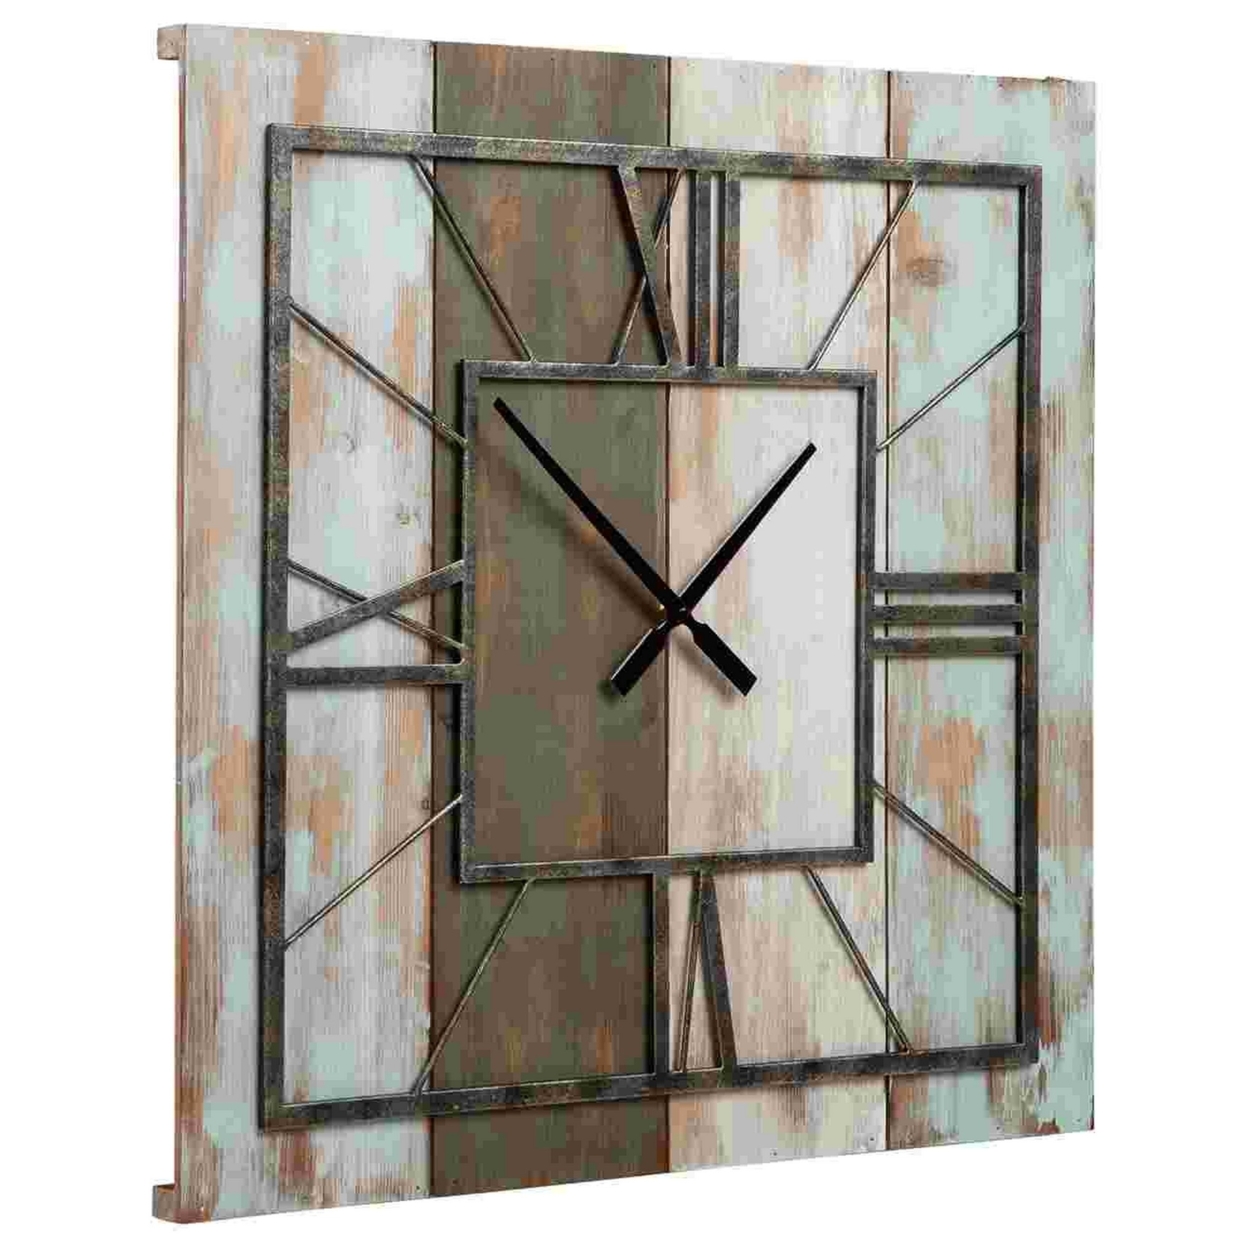 Wall Clock With Wooden Panel Back And Metal Roman Numbers, Antique White- Saltoro Sherpi